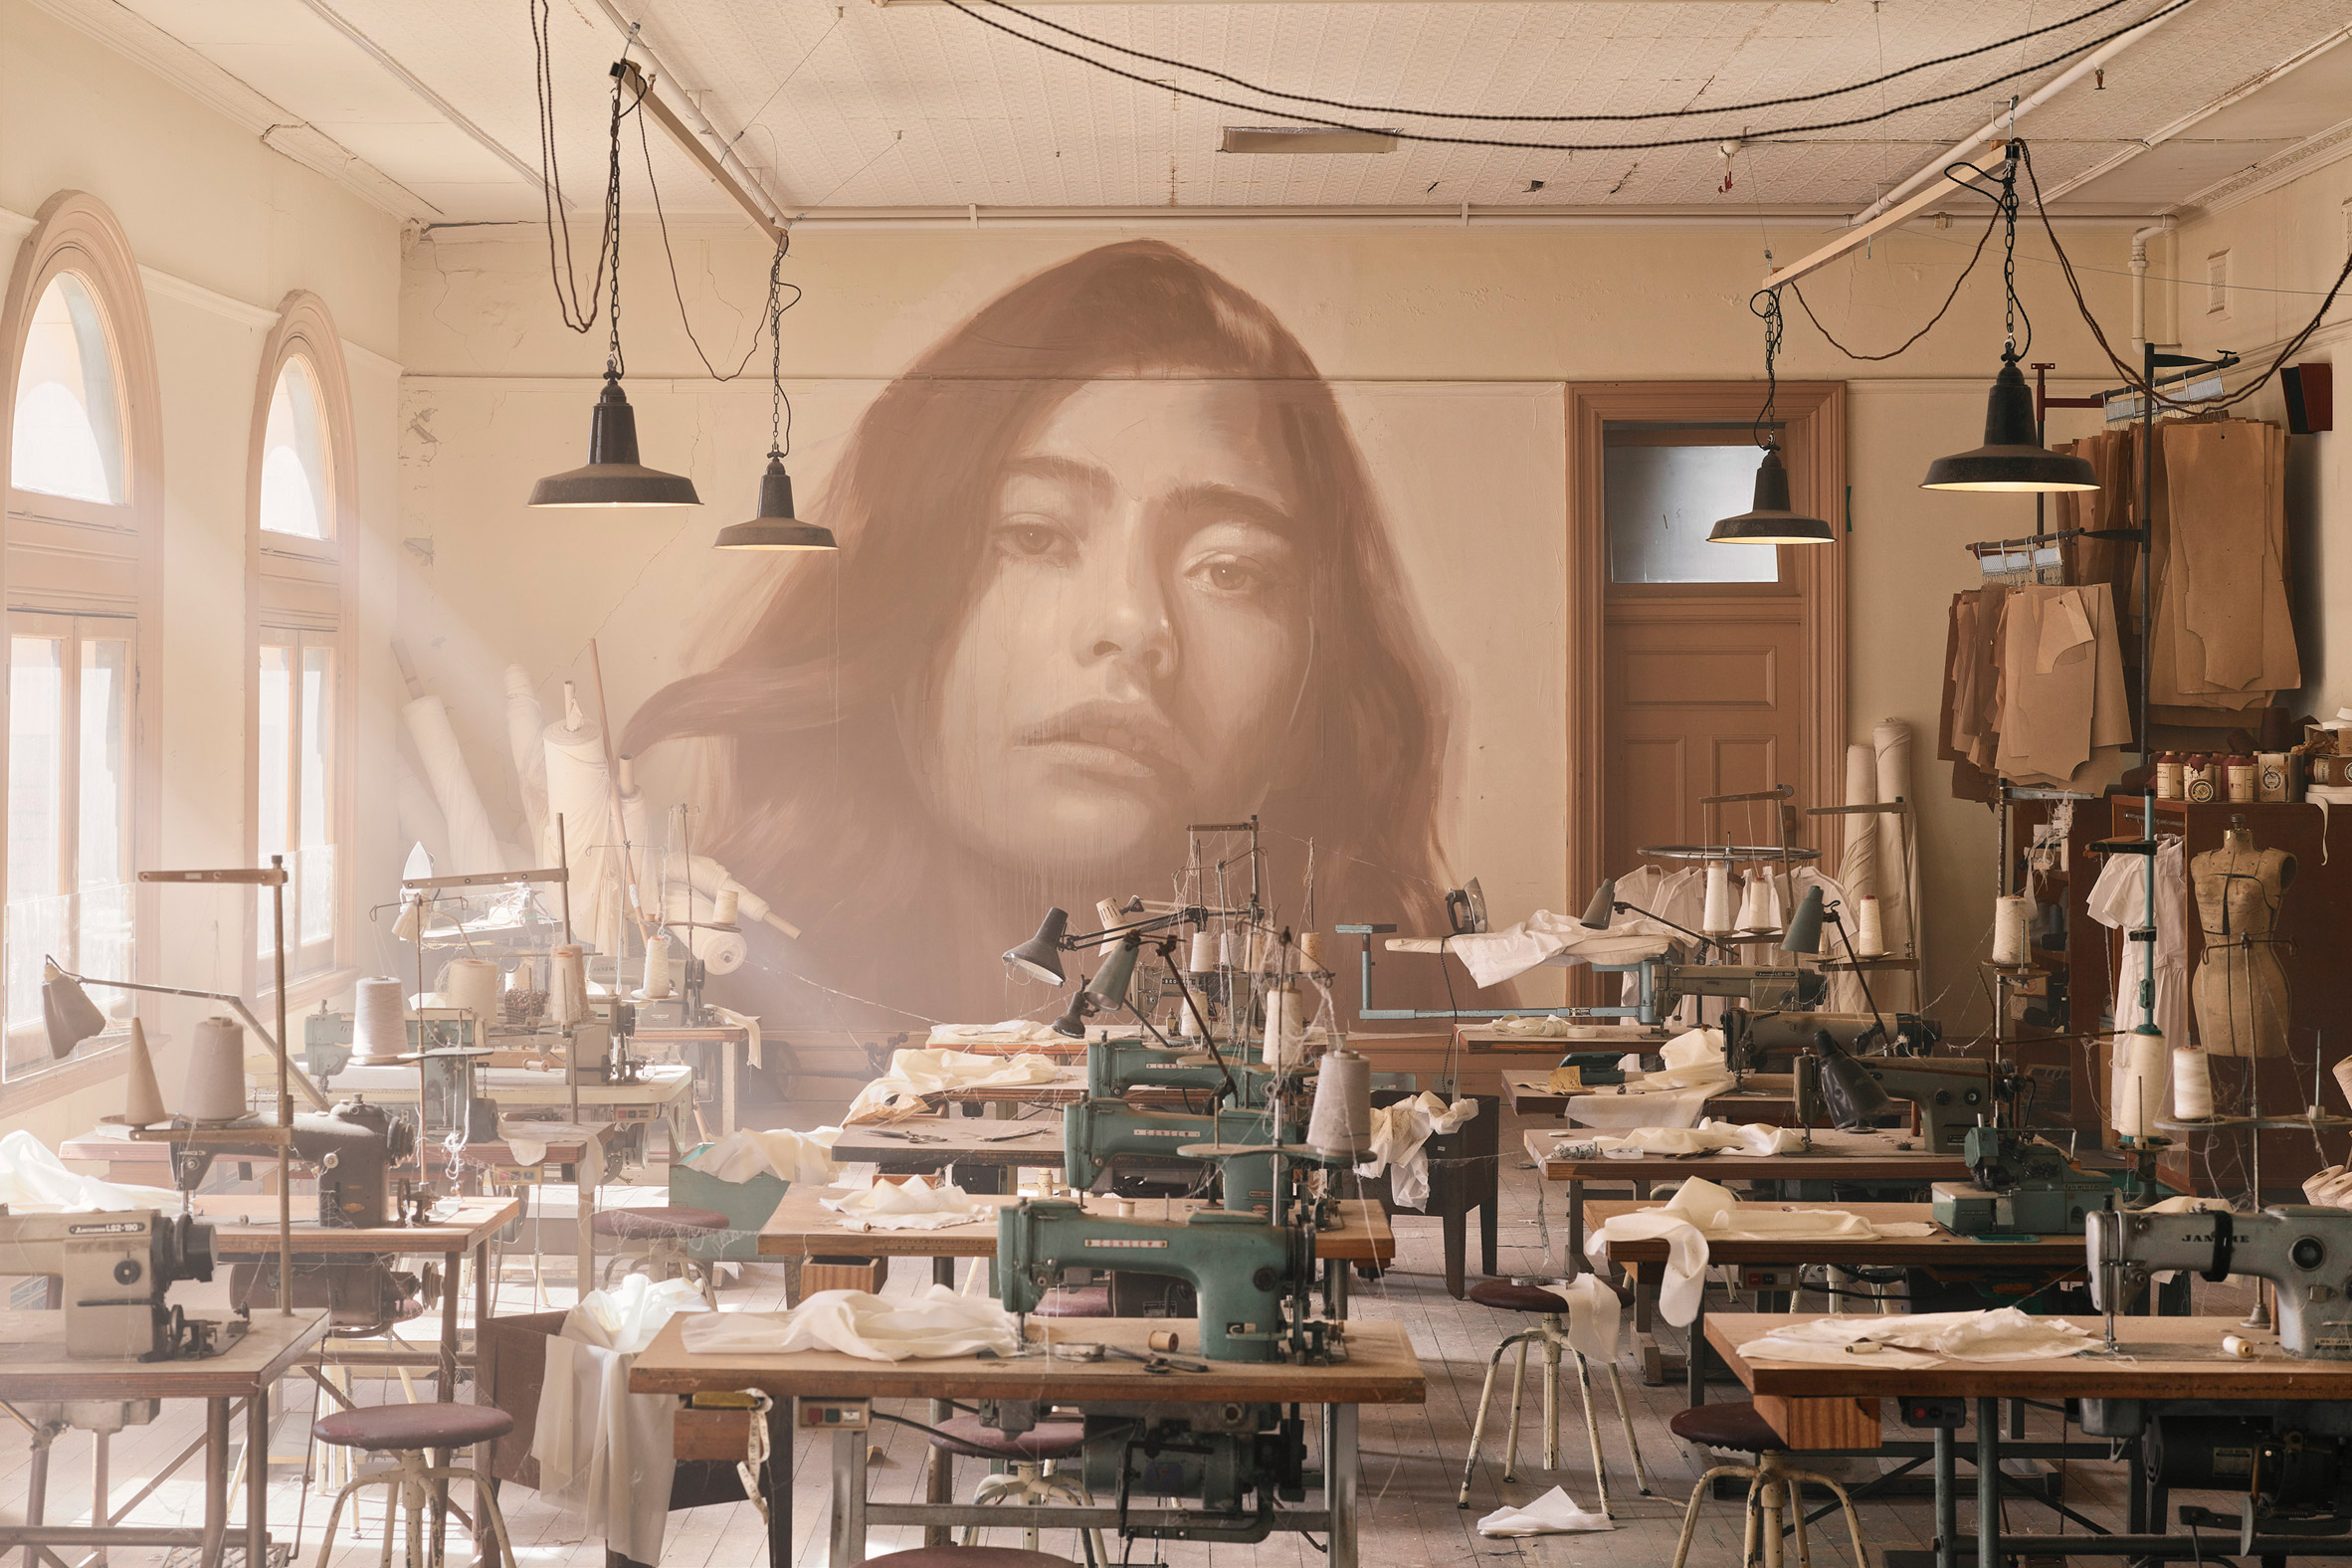 Industrial interior with rows of sewing machines at the Time exhibition by Rone